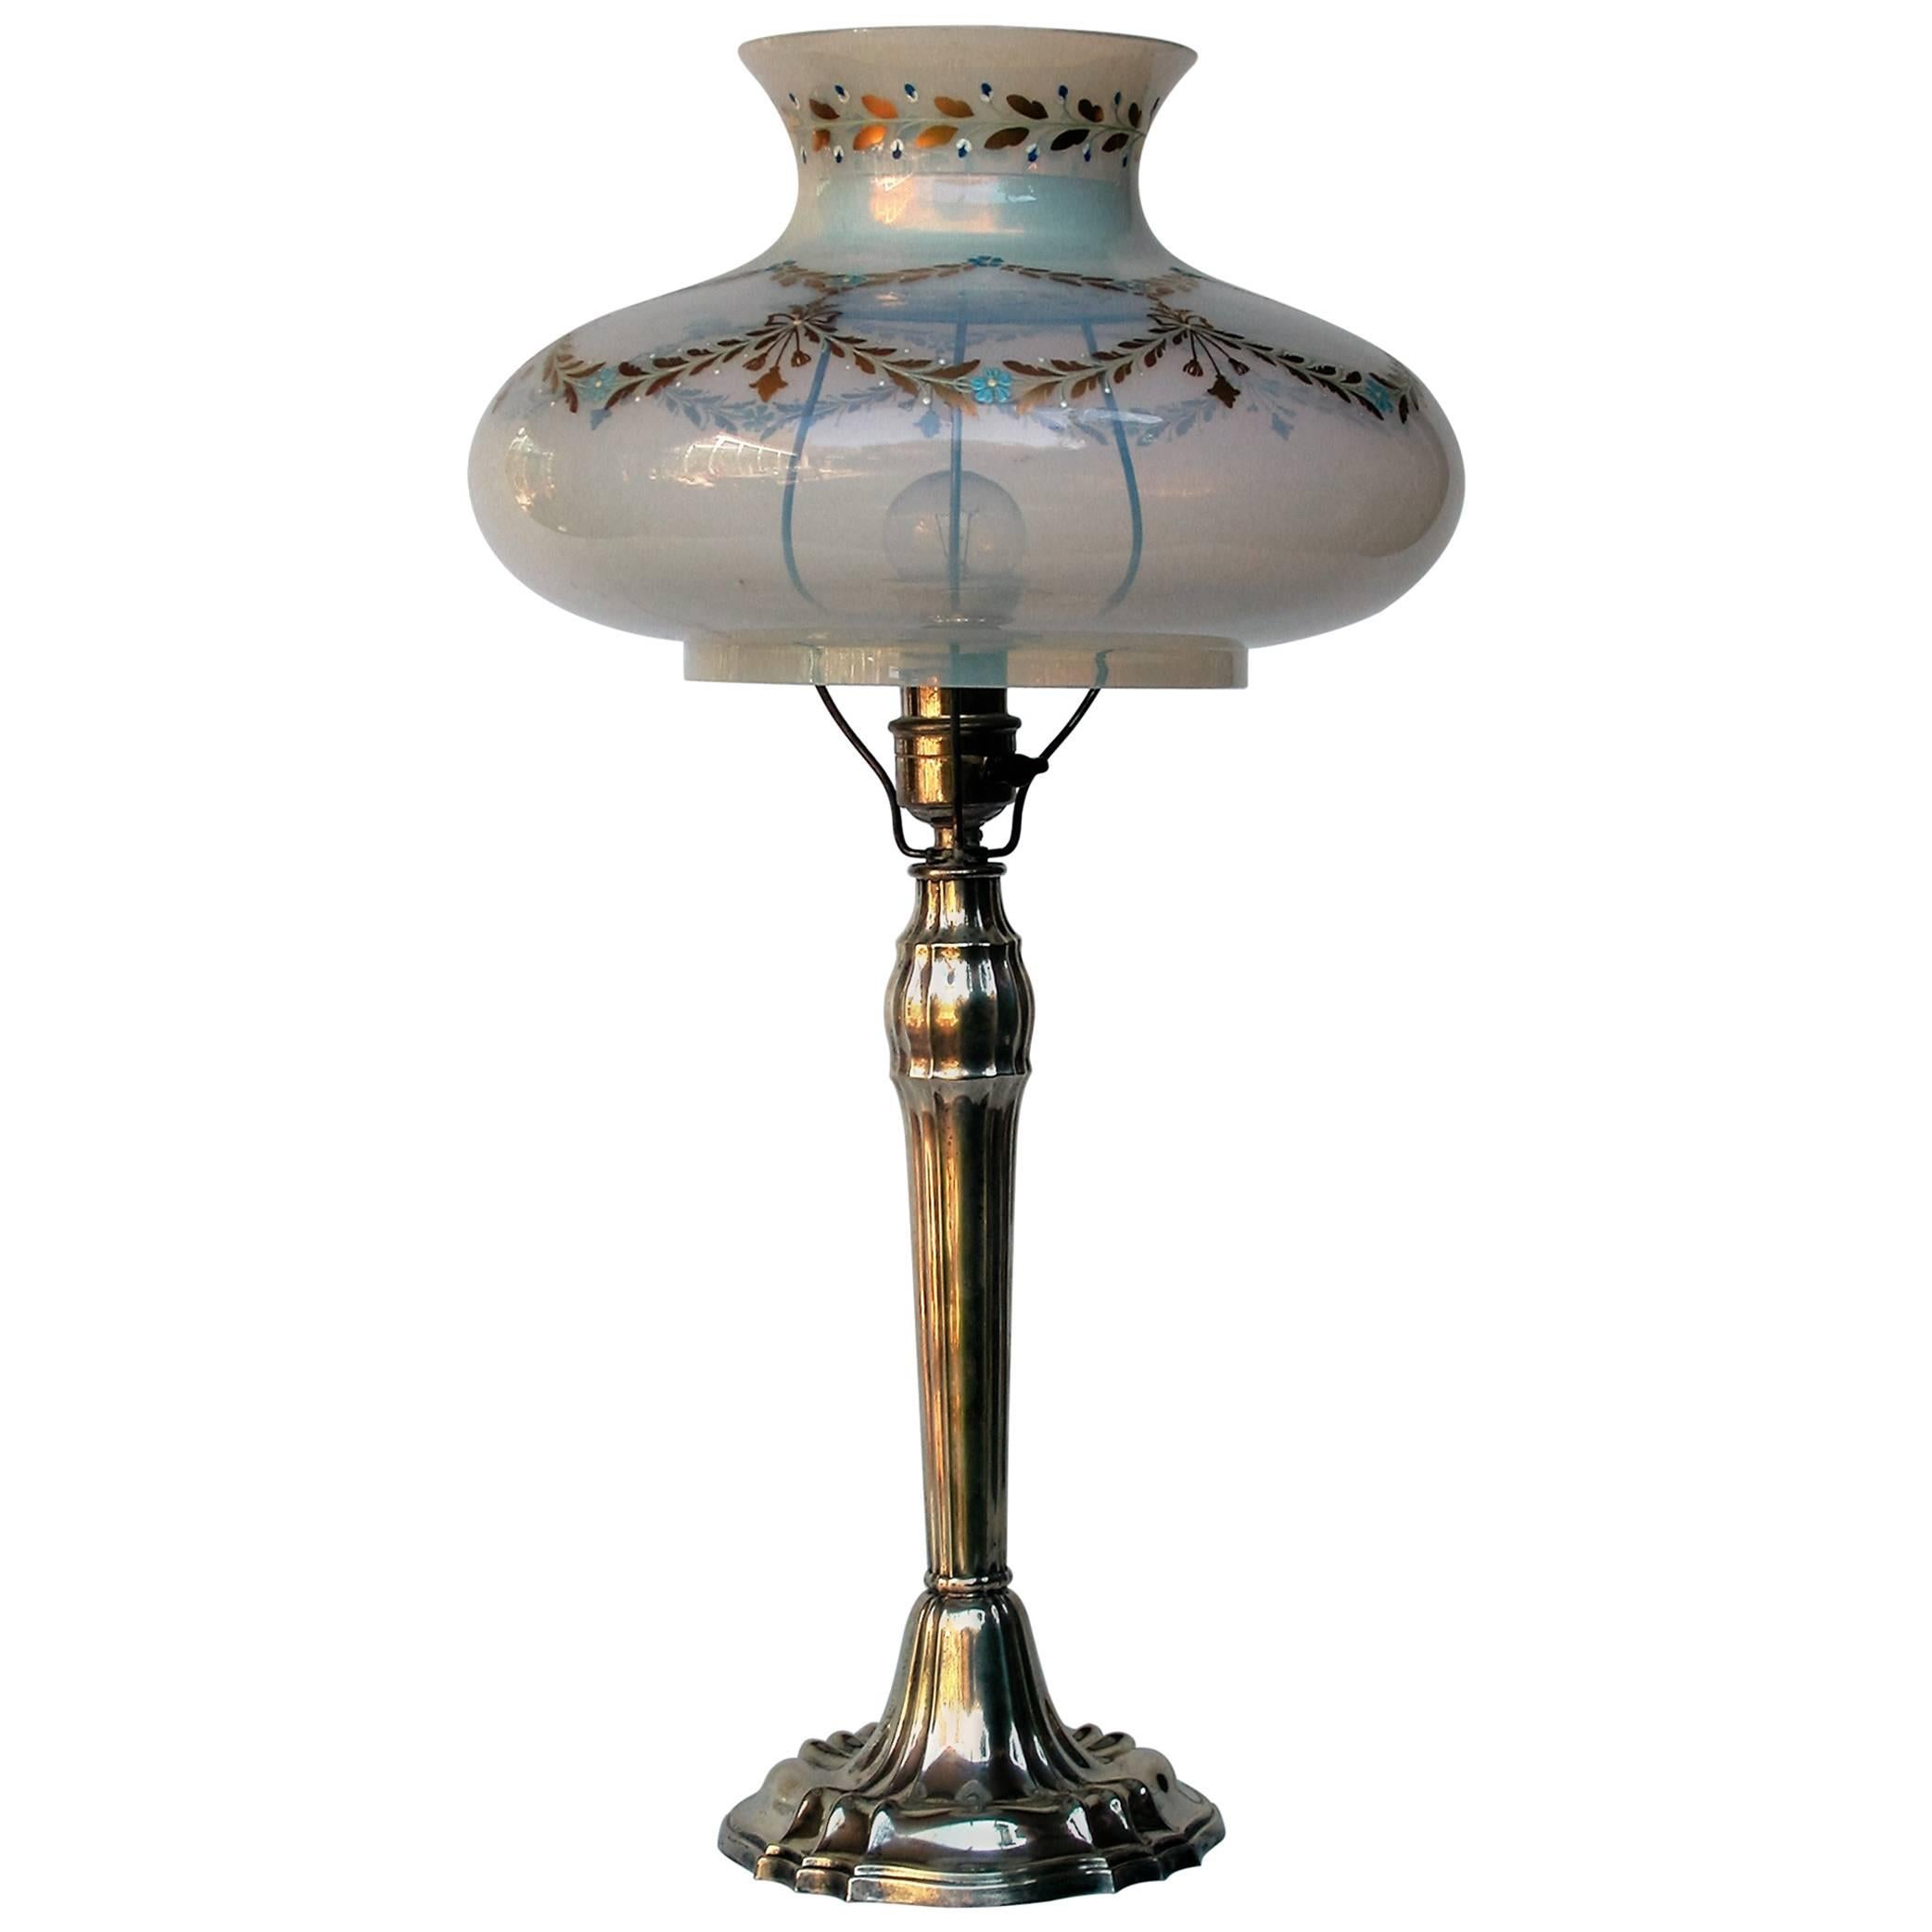 German Art Nouveau Table Lamp by Wilkens & Söhne, Germany, circa 1910 For Sale